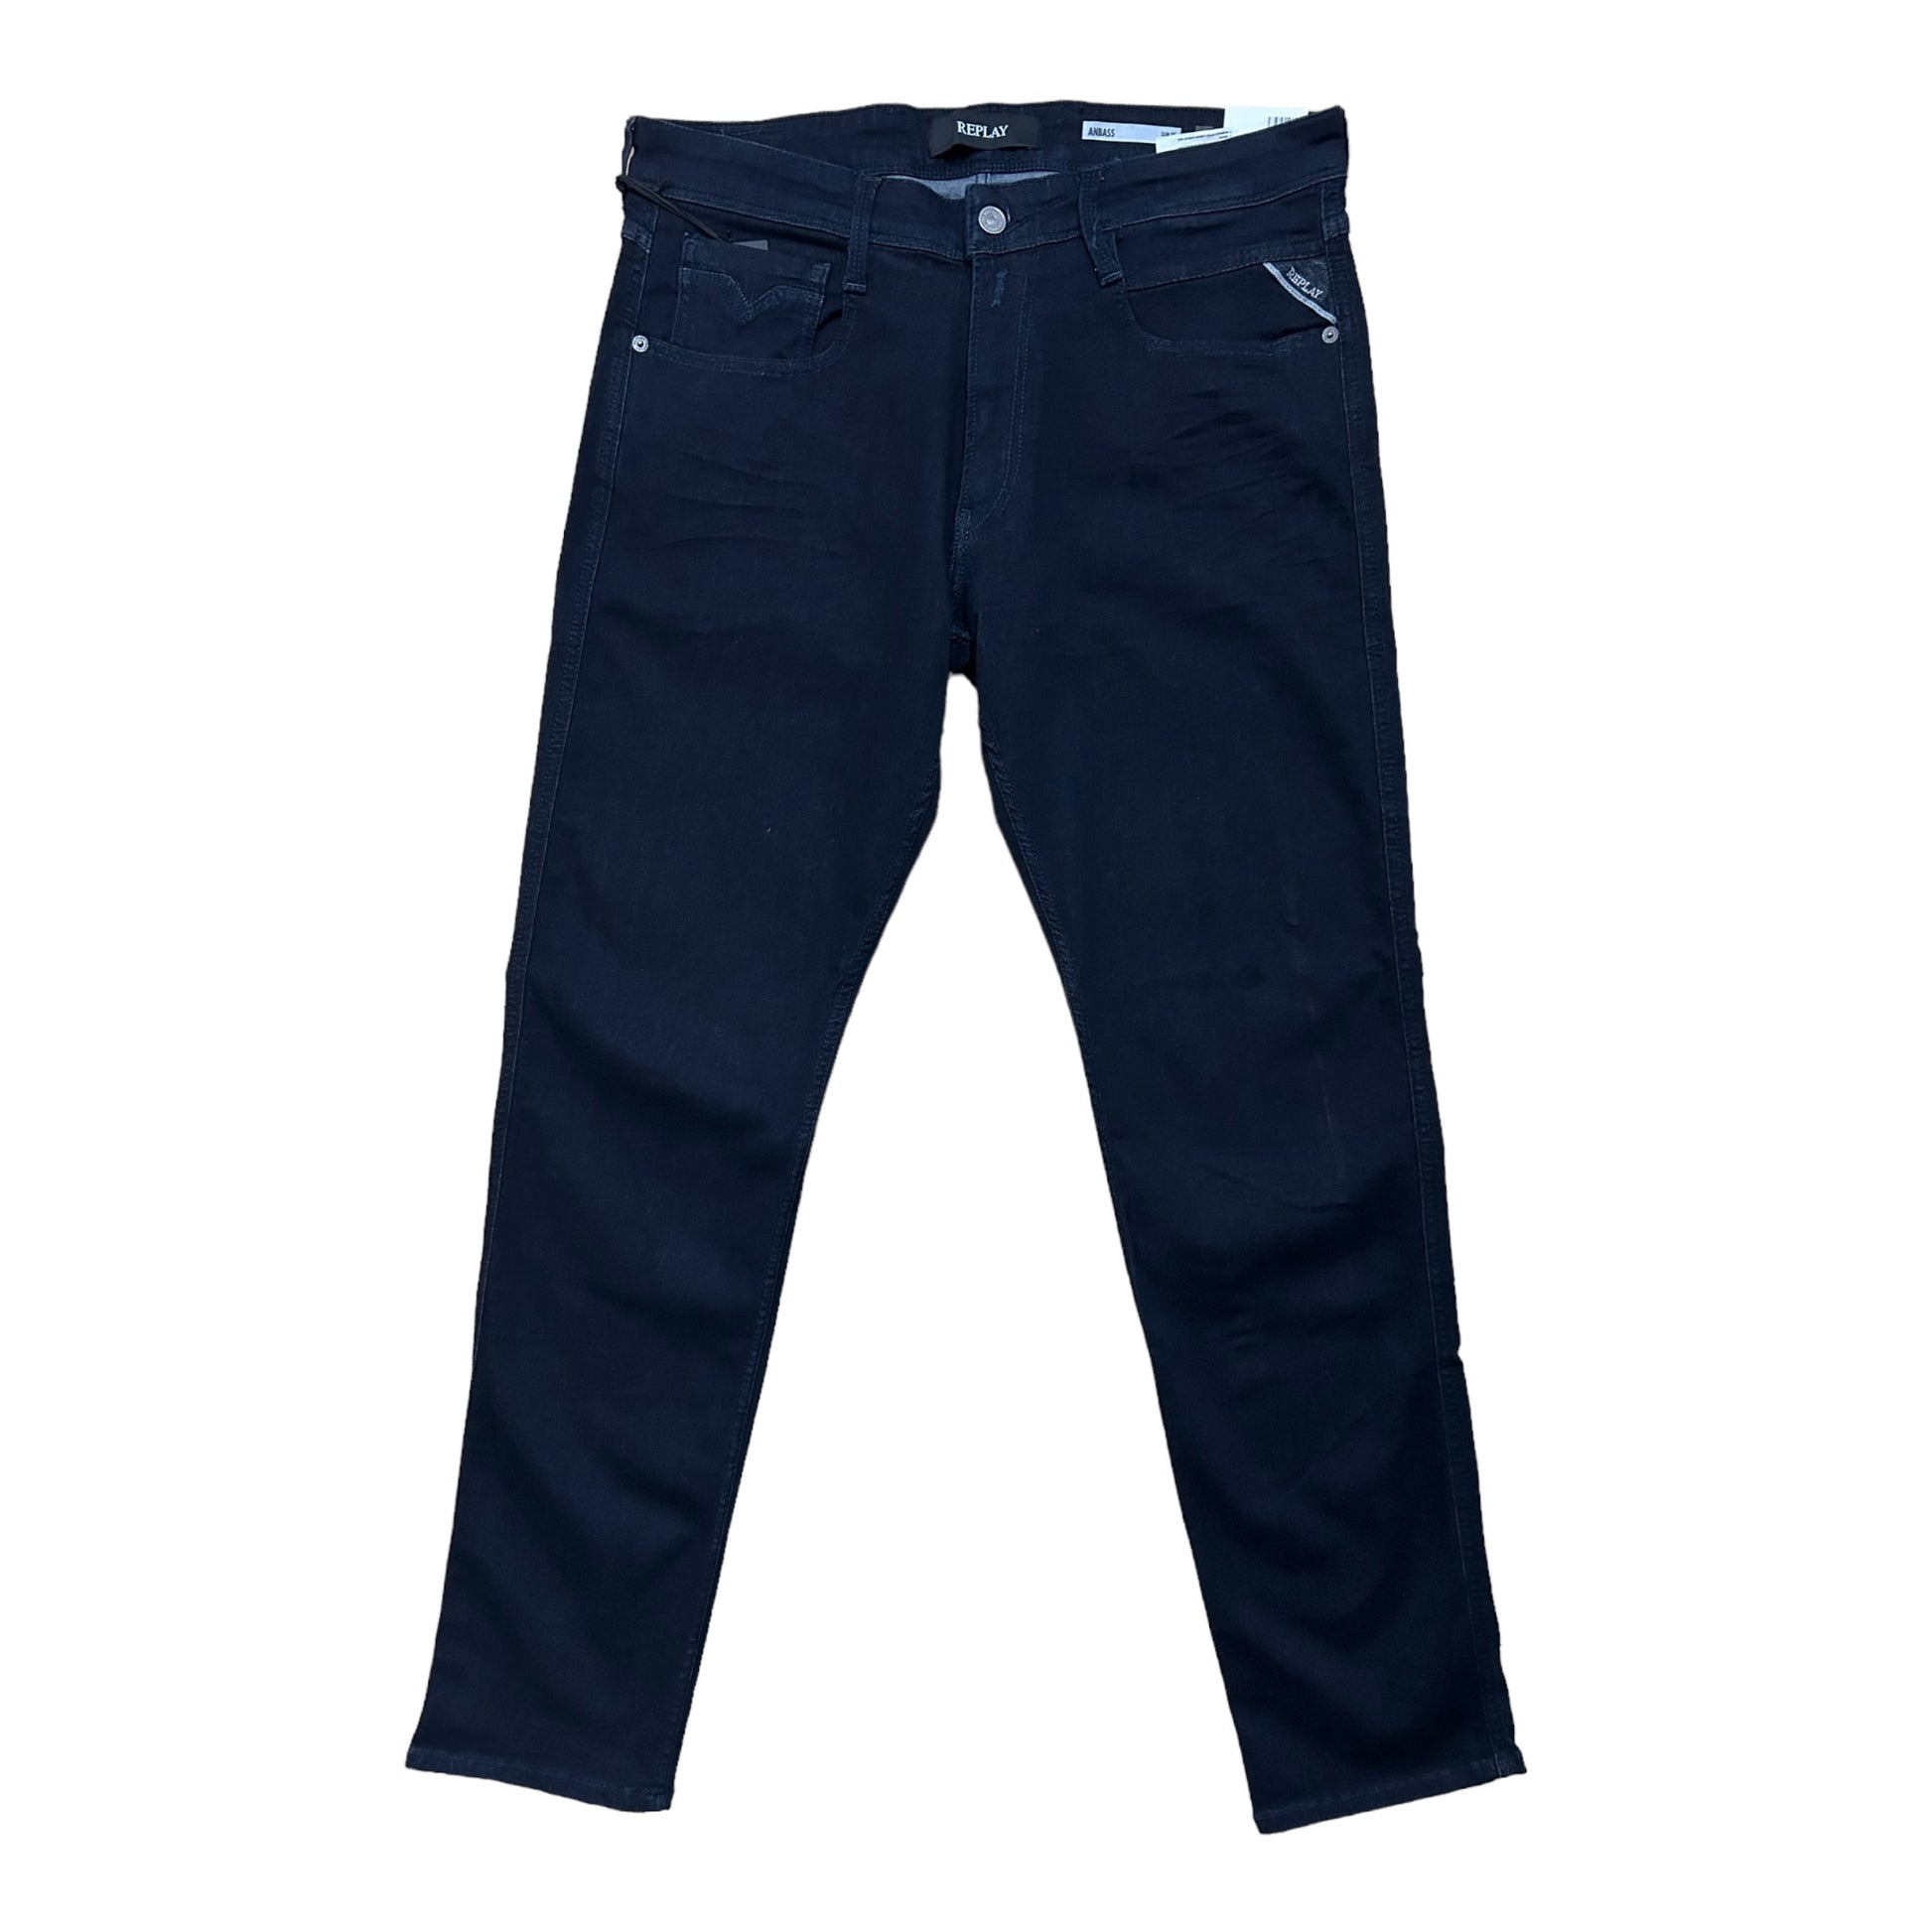 Replay Anbass Slim Jeans - Recurring.Life